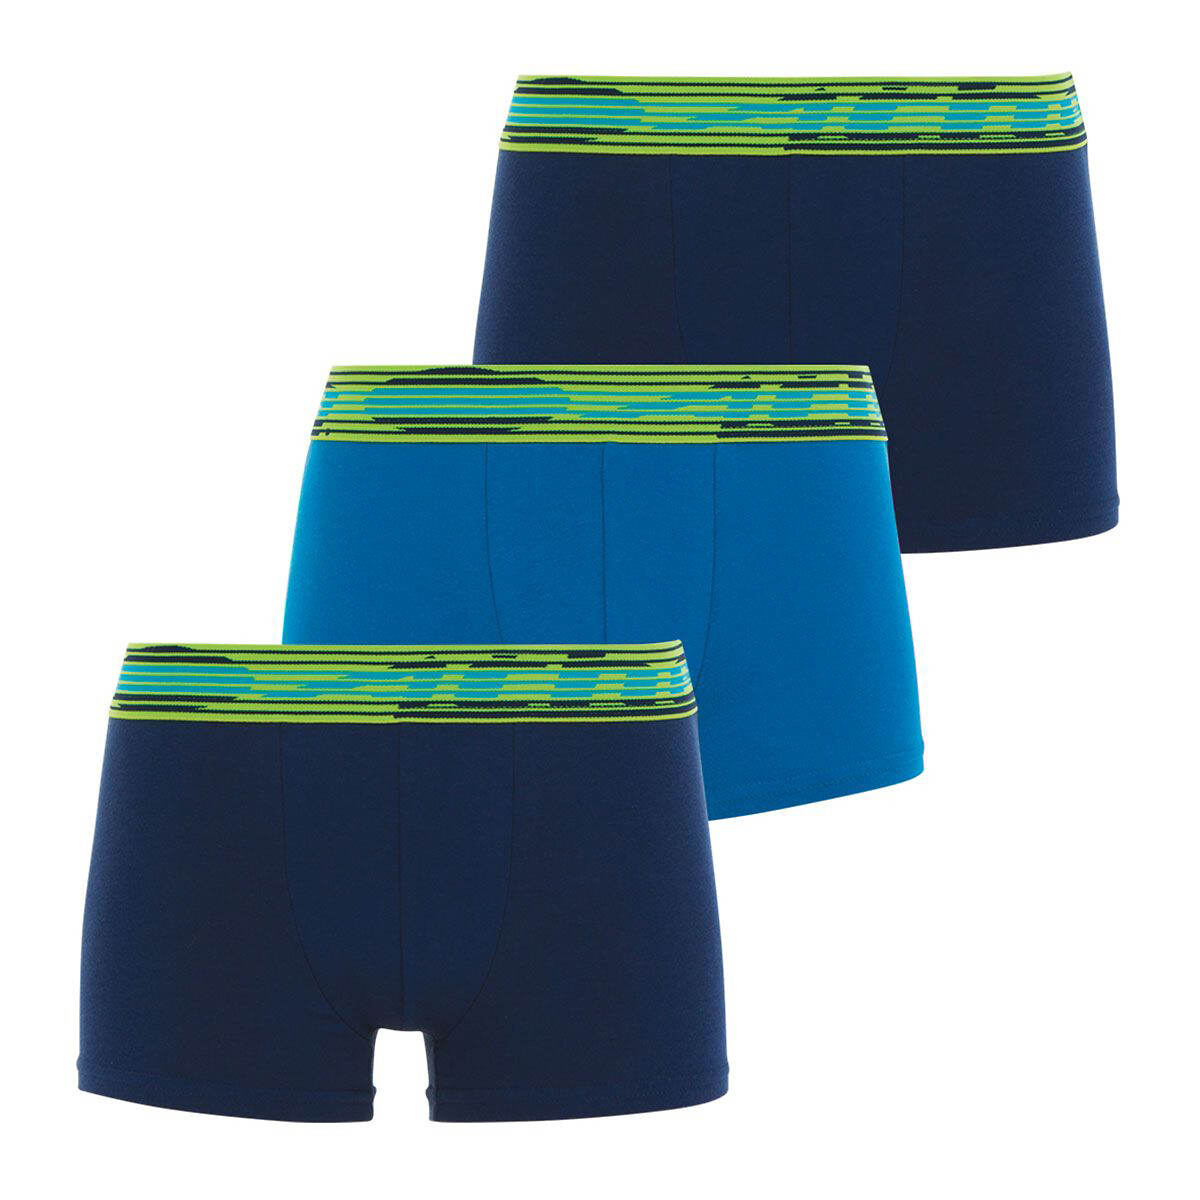 Image of Pack of 3 Cotton Boxers, 6-16 Years